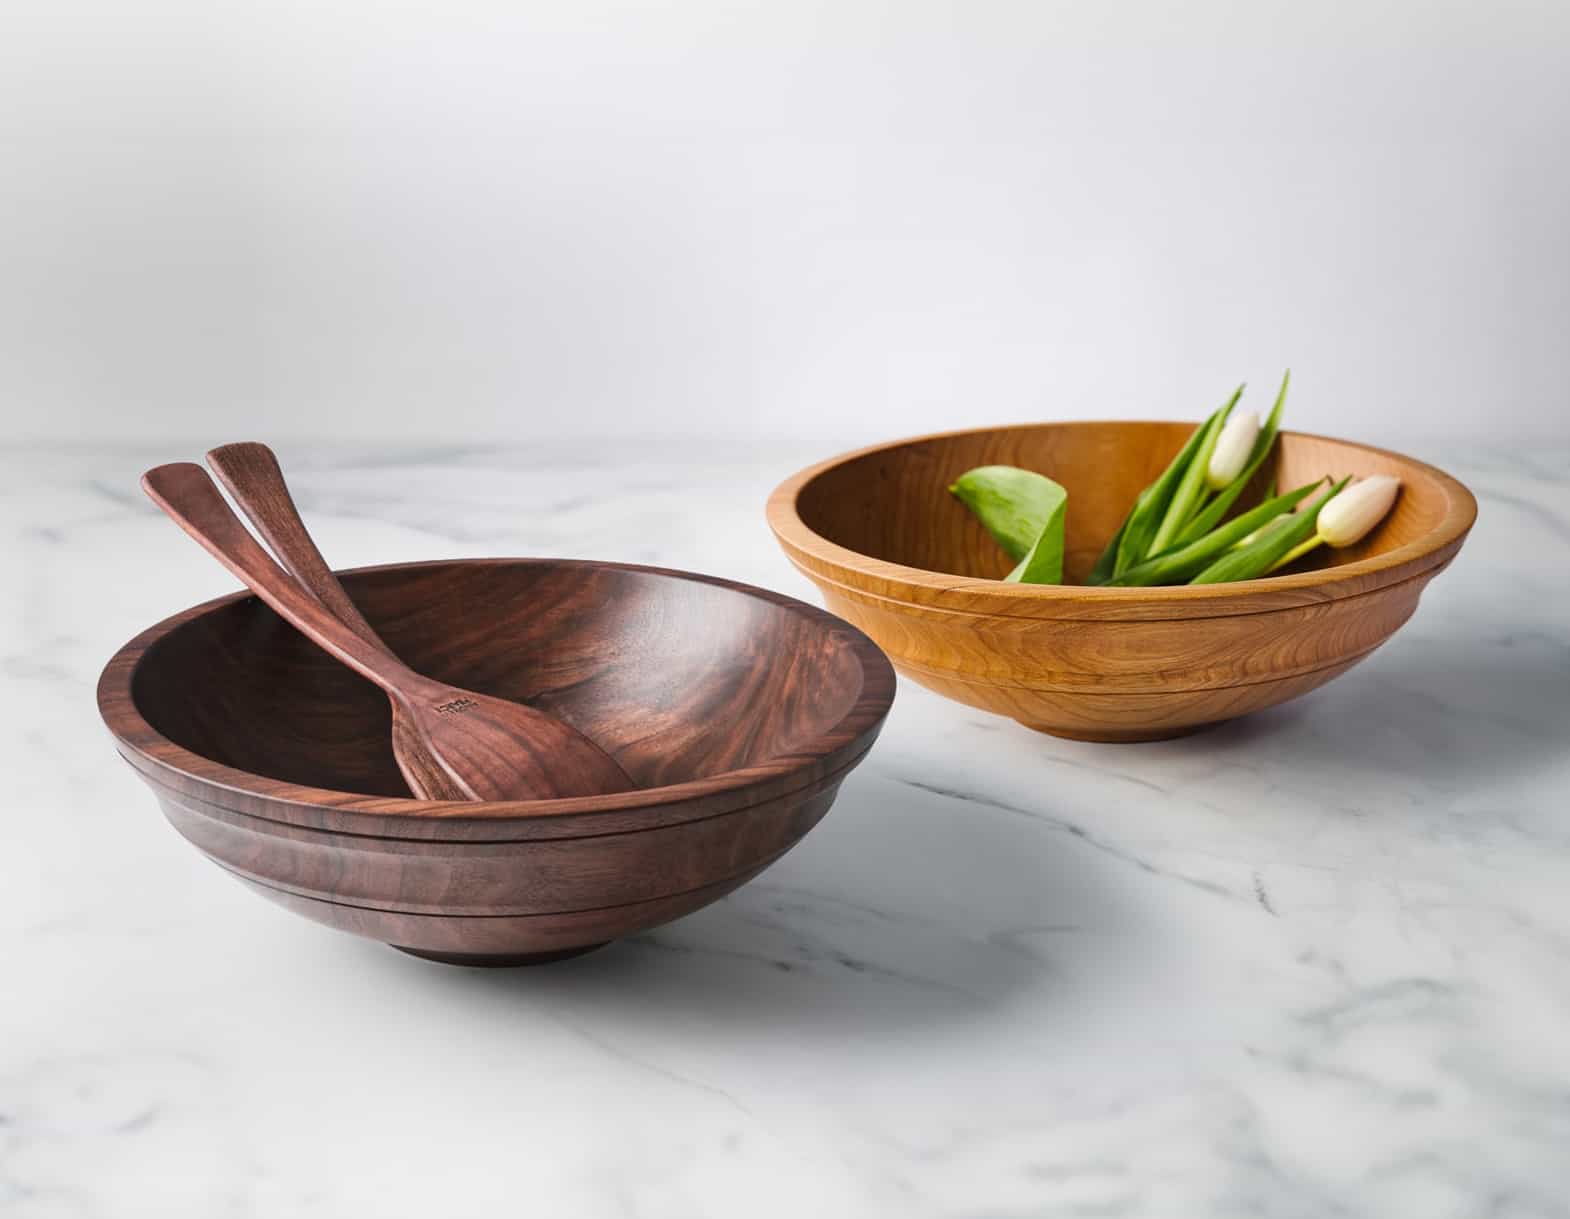 wooden bowls and wood salad bowls from Andrew Pearce Bowls shown with wooden salad servers and fresh cut flowers. One wooden bowls is in walnut and the other bowl is in cherry.